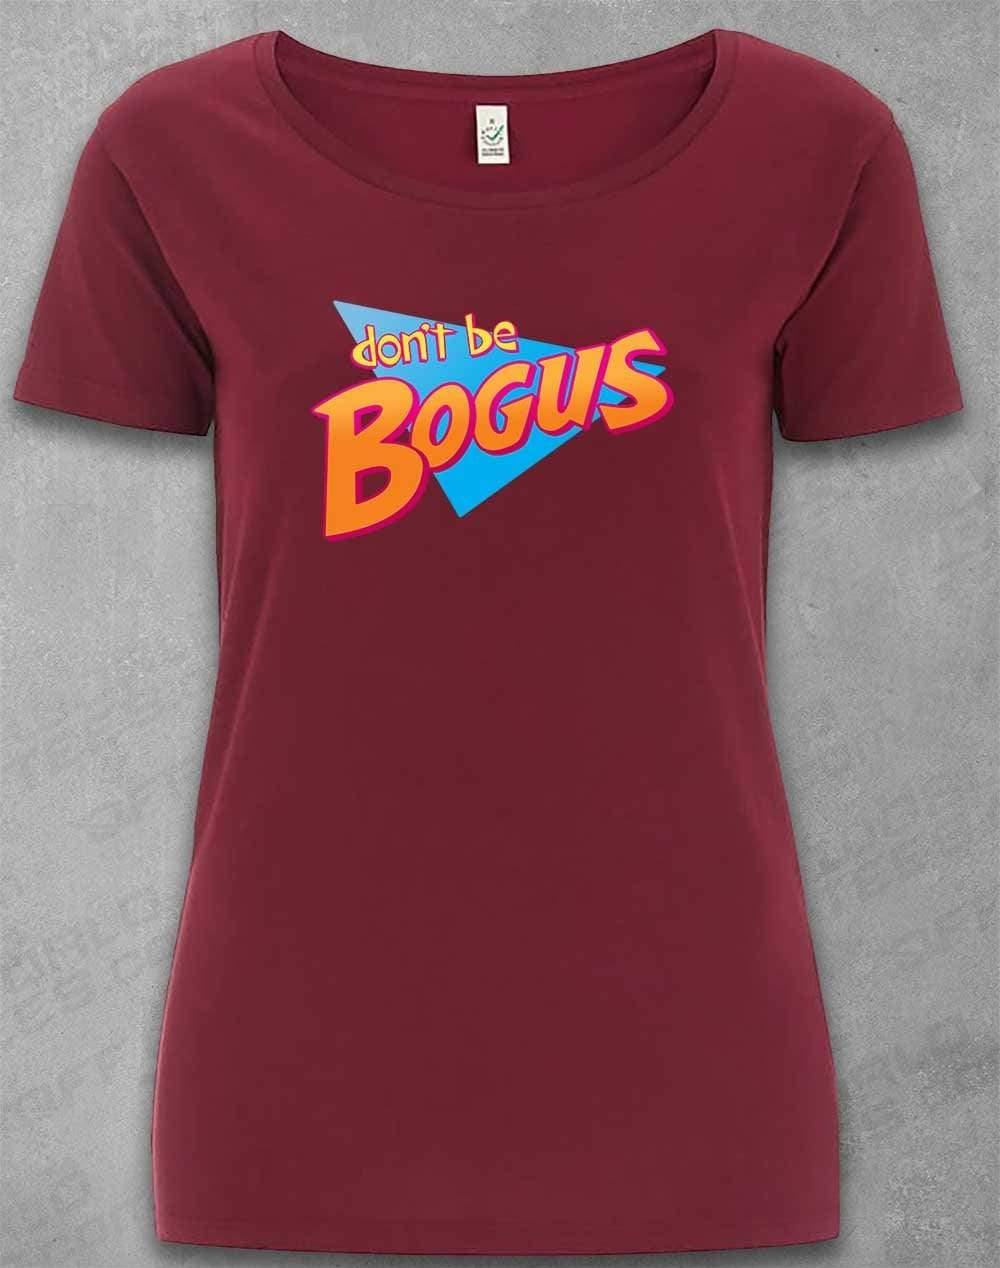 DELUXE Don't be Bogus Organic Scoop Neck T-Shirt 8-10 / Burgundy  - Off World Tees